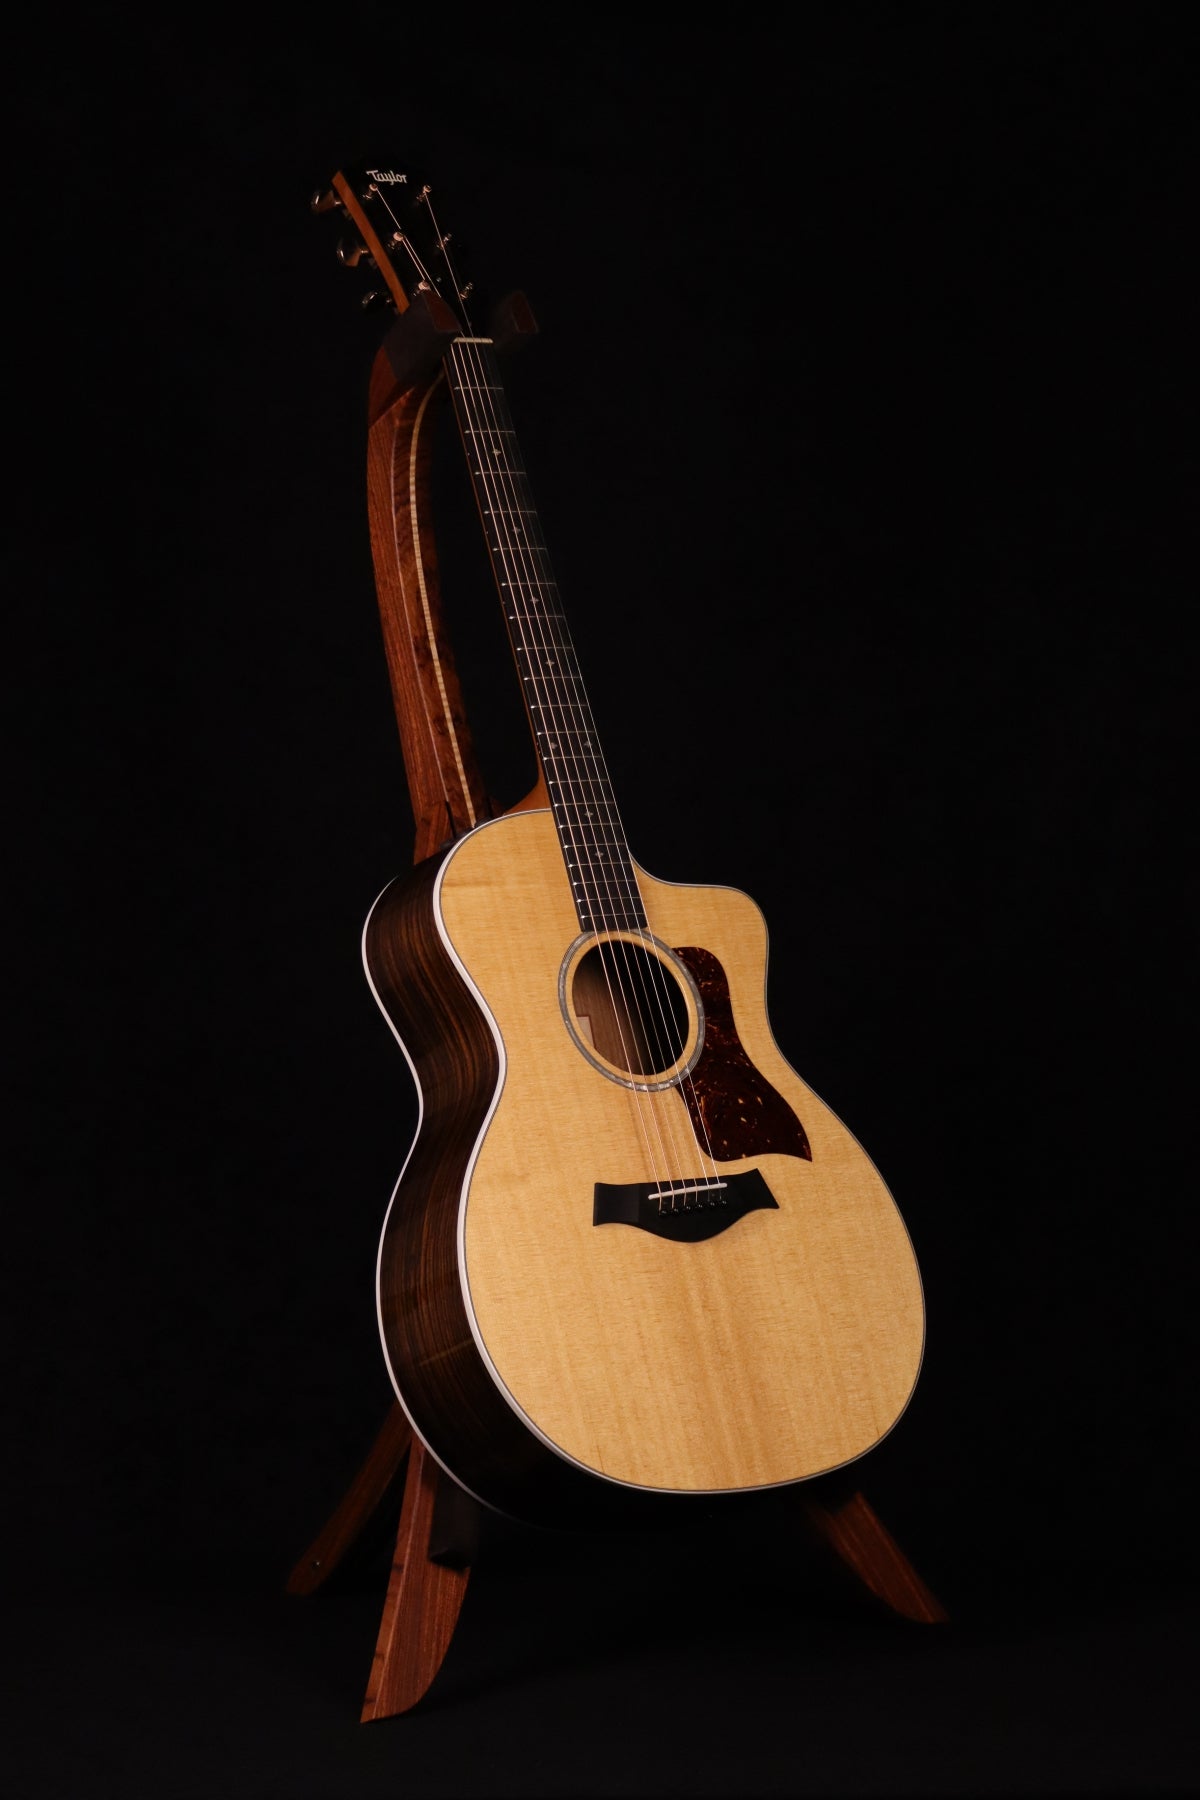 Folding bubinga rosewood and curly maple wood guitar floor stand full front image with Taylor guitar